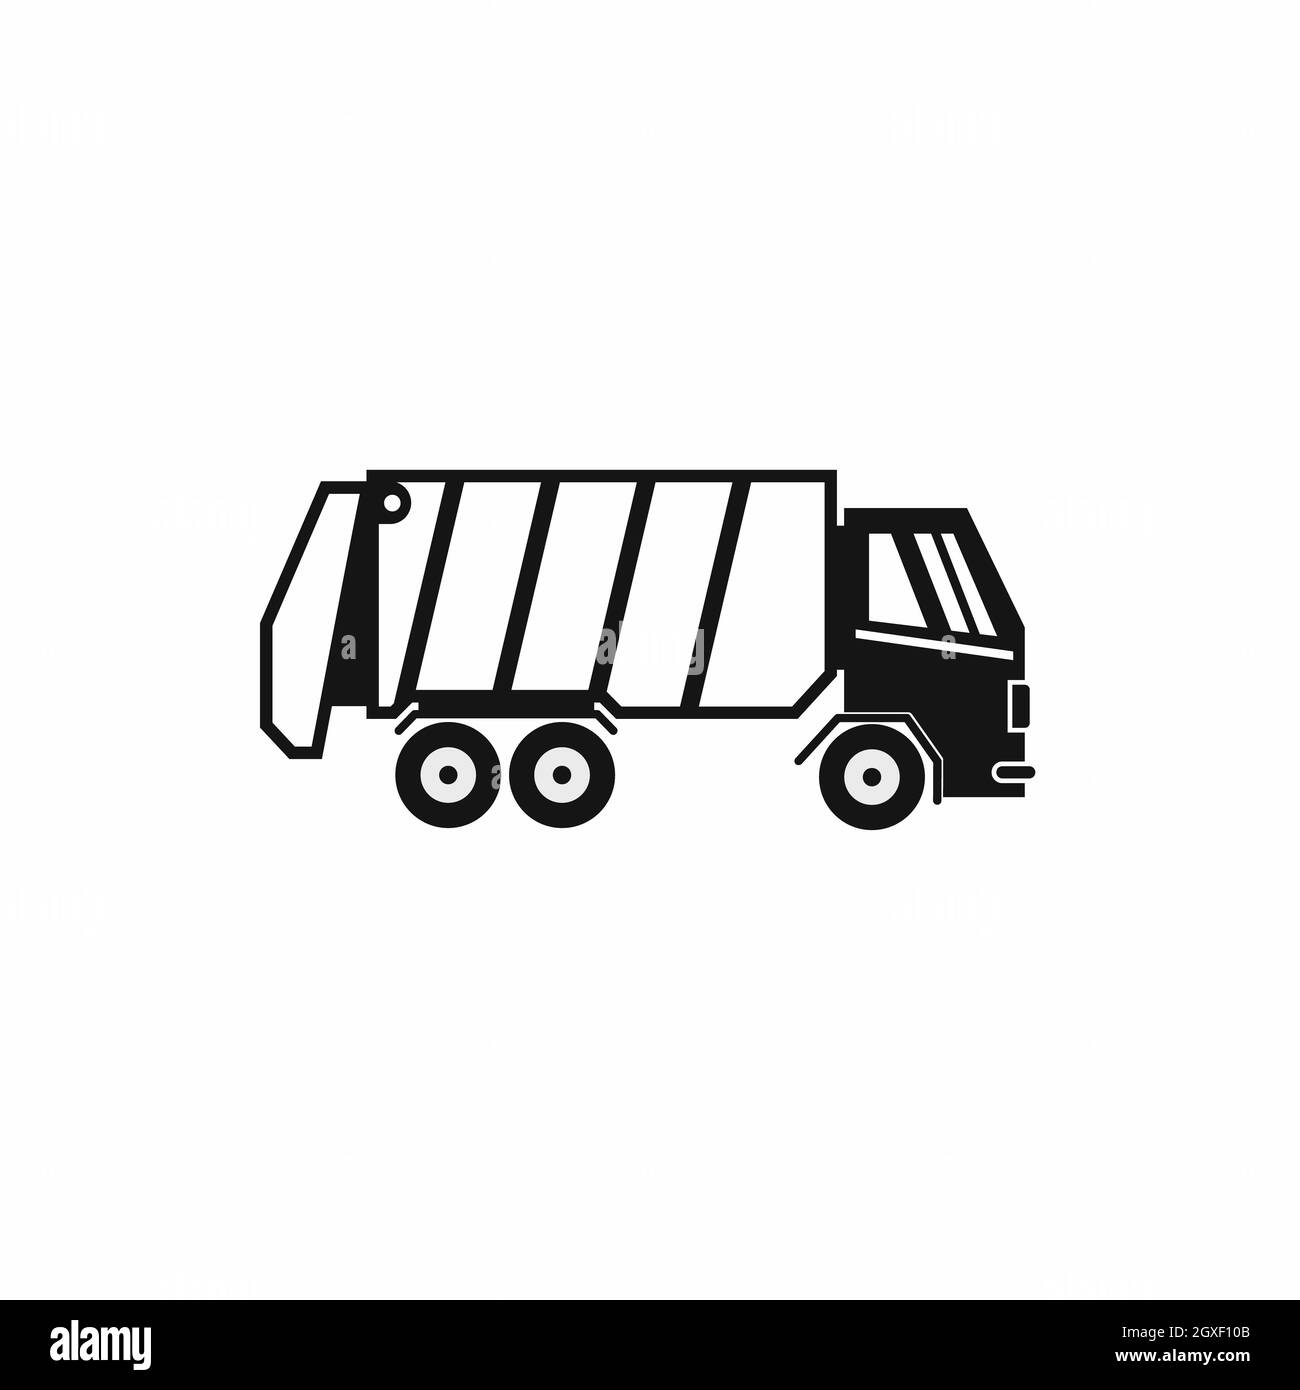 Garbage truck icon in simple style isolated on white background Stock Photo